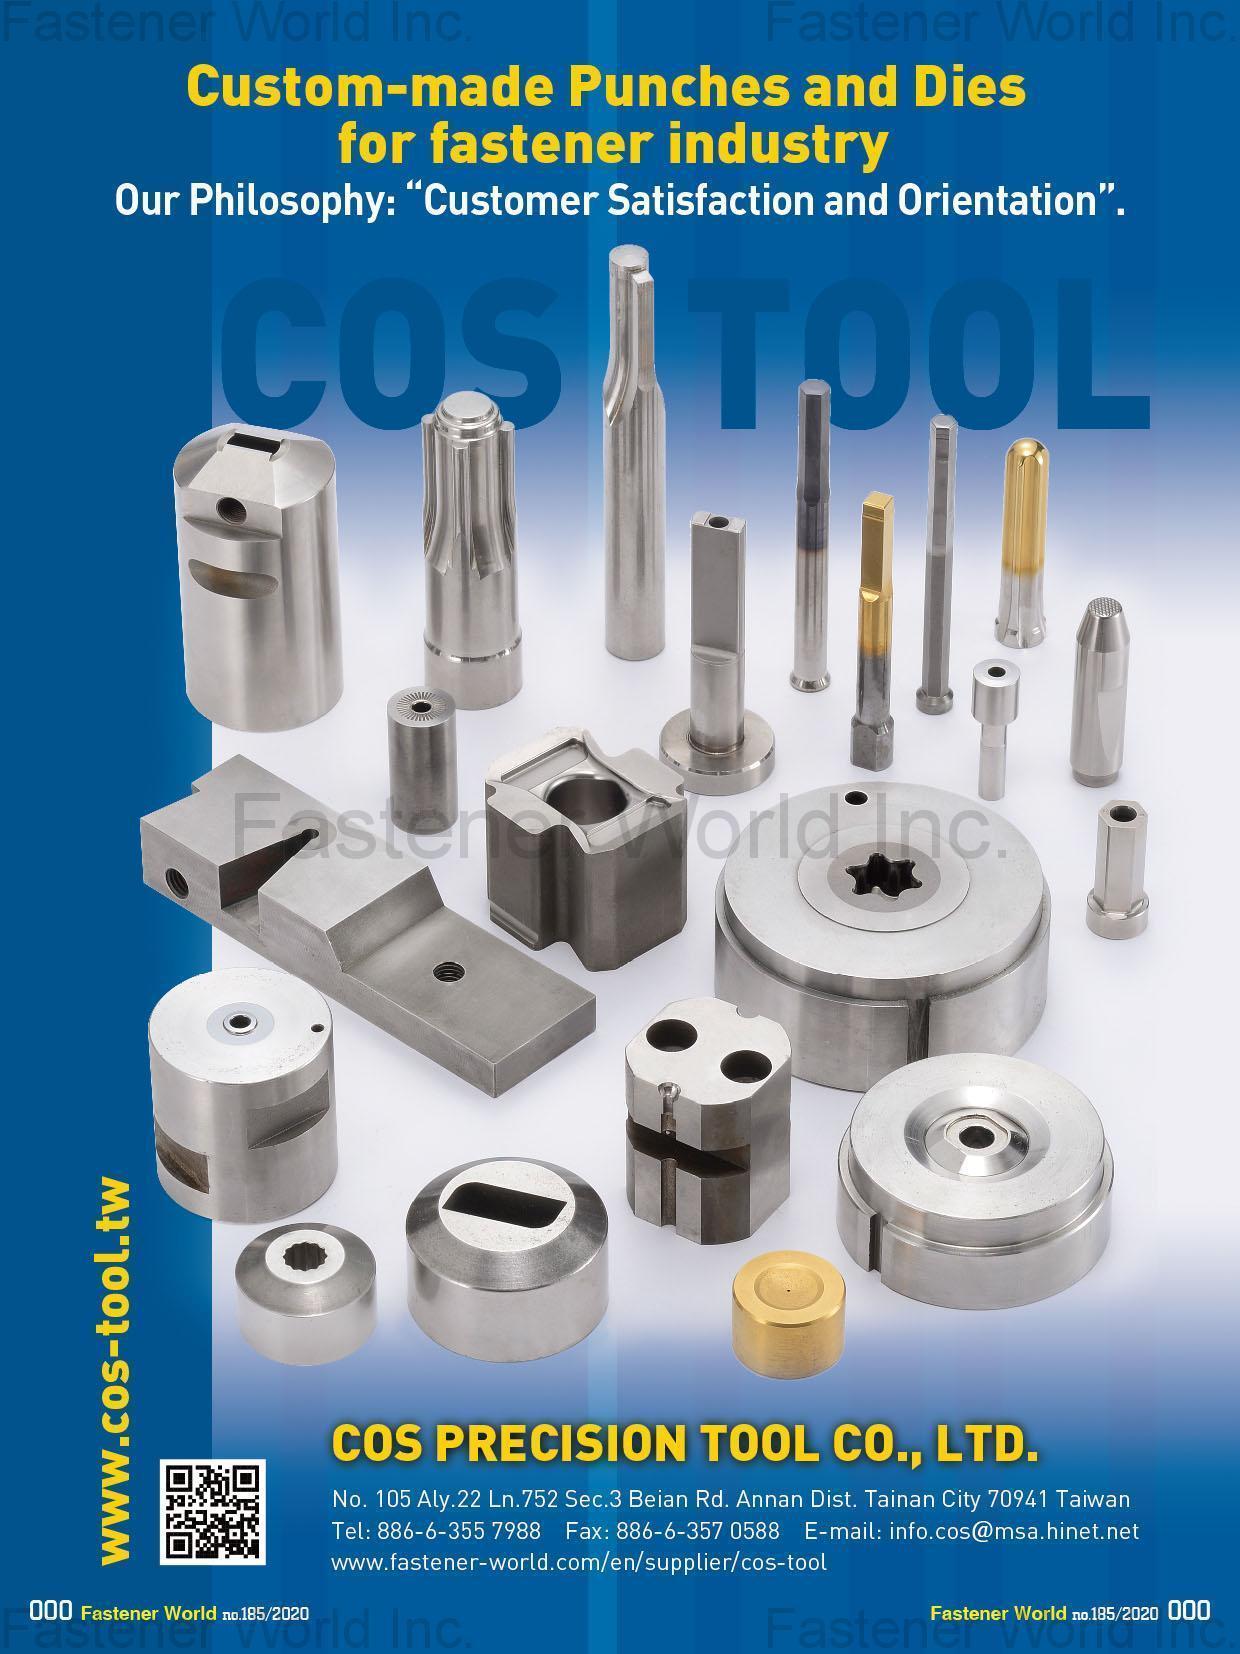 COS PRECISION TOOL CO., LTD. , Custom-made Punches and Dies for Fastener Industry